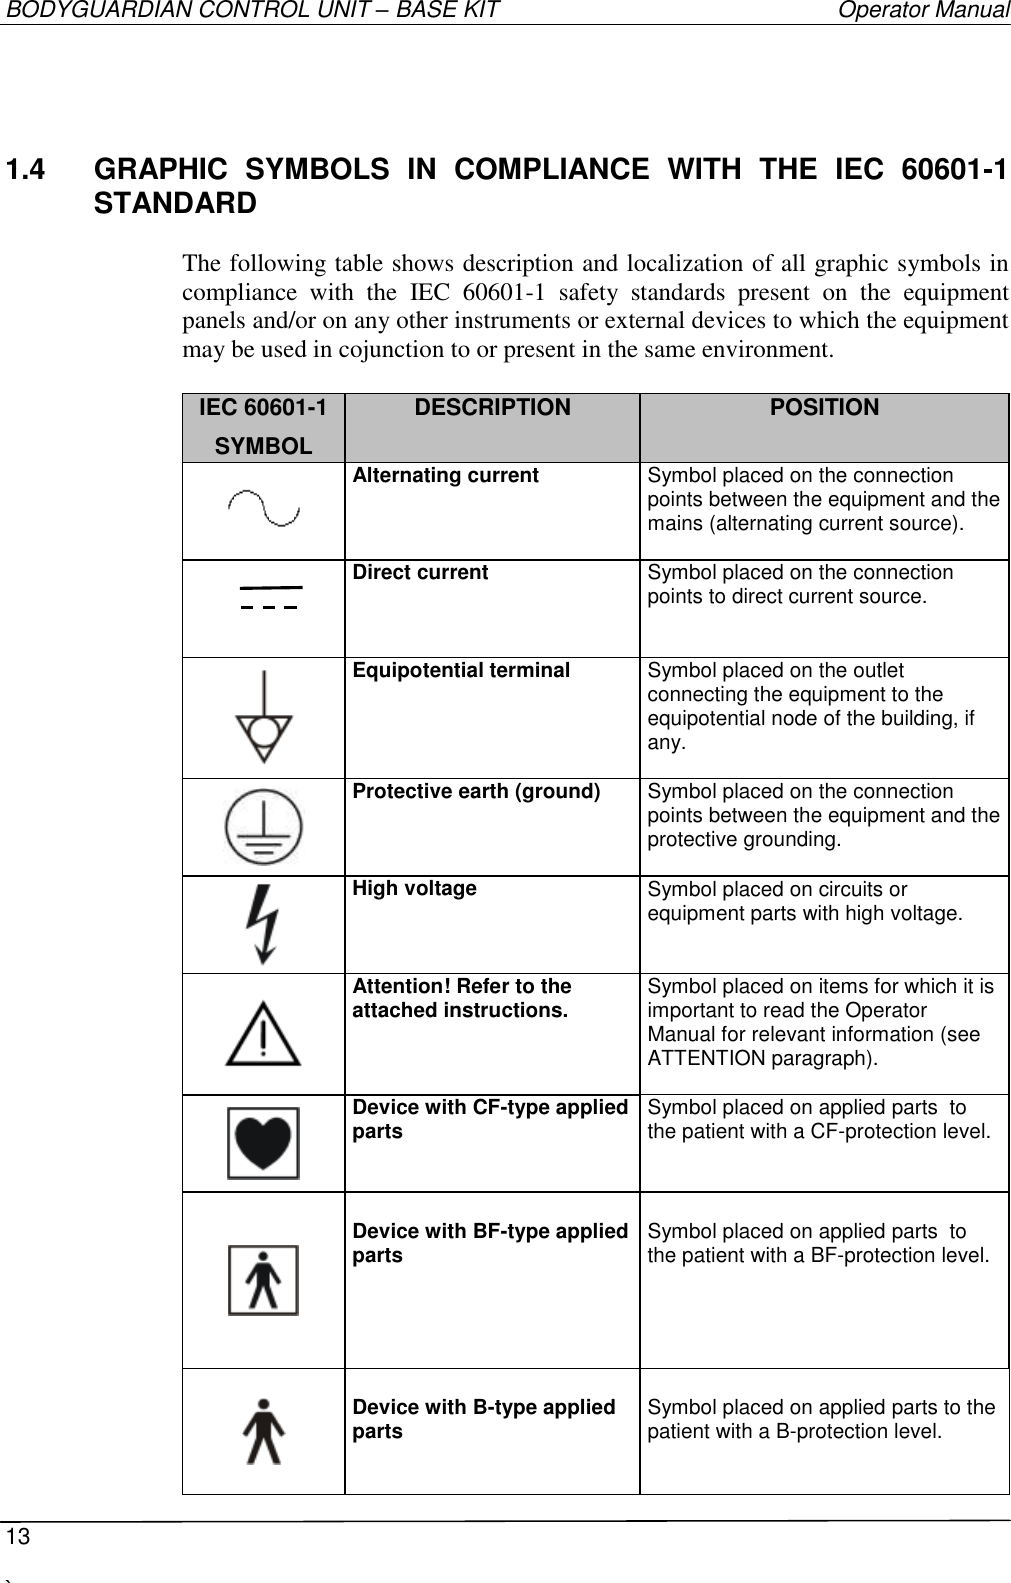 BODYGUARDIAN CONTROL UNIT – BASE KIT   Operator Manual  13  `   1.4  GRAPHIC  SYMBOLS  IN  COMPLIANCE  WITH  THE  IEC  60601-1      STANDARD  The following table shows description and localization of all graphic symbols in compliance  with  the  IEC  60601-1  safety  standards  present  on  the  equipment panels and/or on any other instruments or external devices to which the equipment may be used in cojunction to or present in the same environment.  IEC 60601-1 SYMBOL DESCRIPTION POSITION  Alternating current Symbol placed on the connection points between the equipment and the mains (alternating current source).   Direct current Symbol placed on the connection points to direct current source.    Equipotential terminal Symbol placed on the outlet connecting the equipment to the equipotential node of the building, if any.   Protective earth (ground) Symbol placed on the connection points between the equipment and the protective grounding.   High voltage Symbol placed on circuits or equipment parts with high voltage.    Attention! Refer to the attached instructions. Symbol placed on items for which it is important to read the Operator Manual for relevant information (see ATTENTION paragraph).   Device with CF-type applied parts   Symbol placed on applied parts  to the patient with a CF-protection level.   Device with BF-type applied parts       Symbol placed on applied parts  to the patient with a BF-protection level.   Device with B-type applied parts     Symbol placed on applied parts to the patient with a B-protection level. 